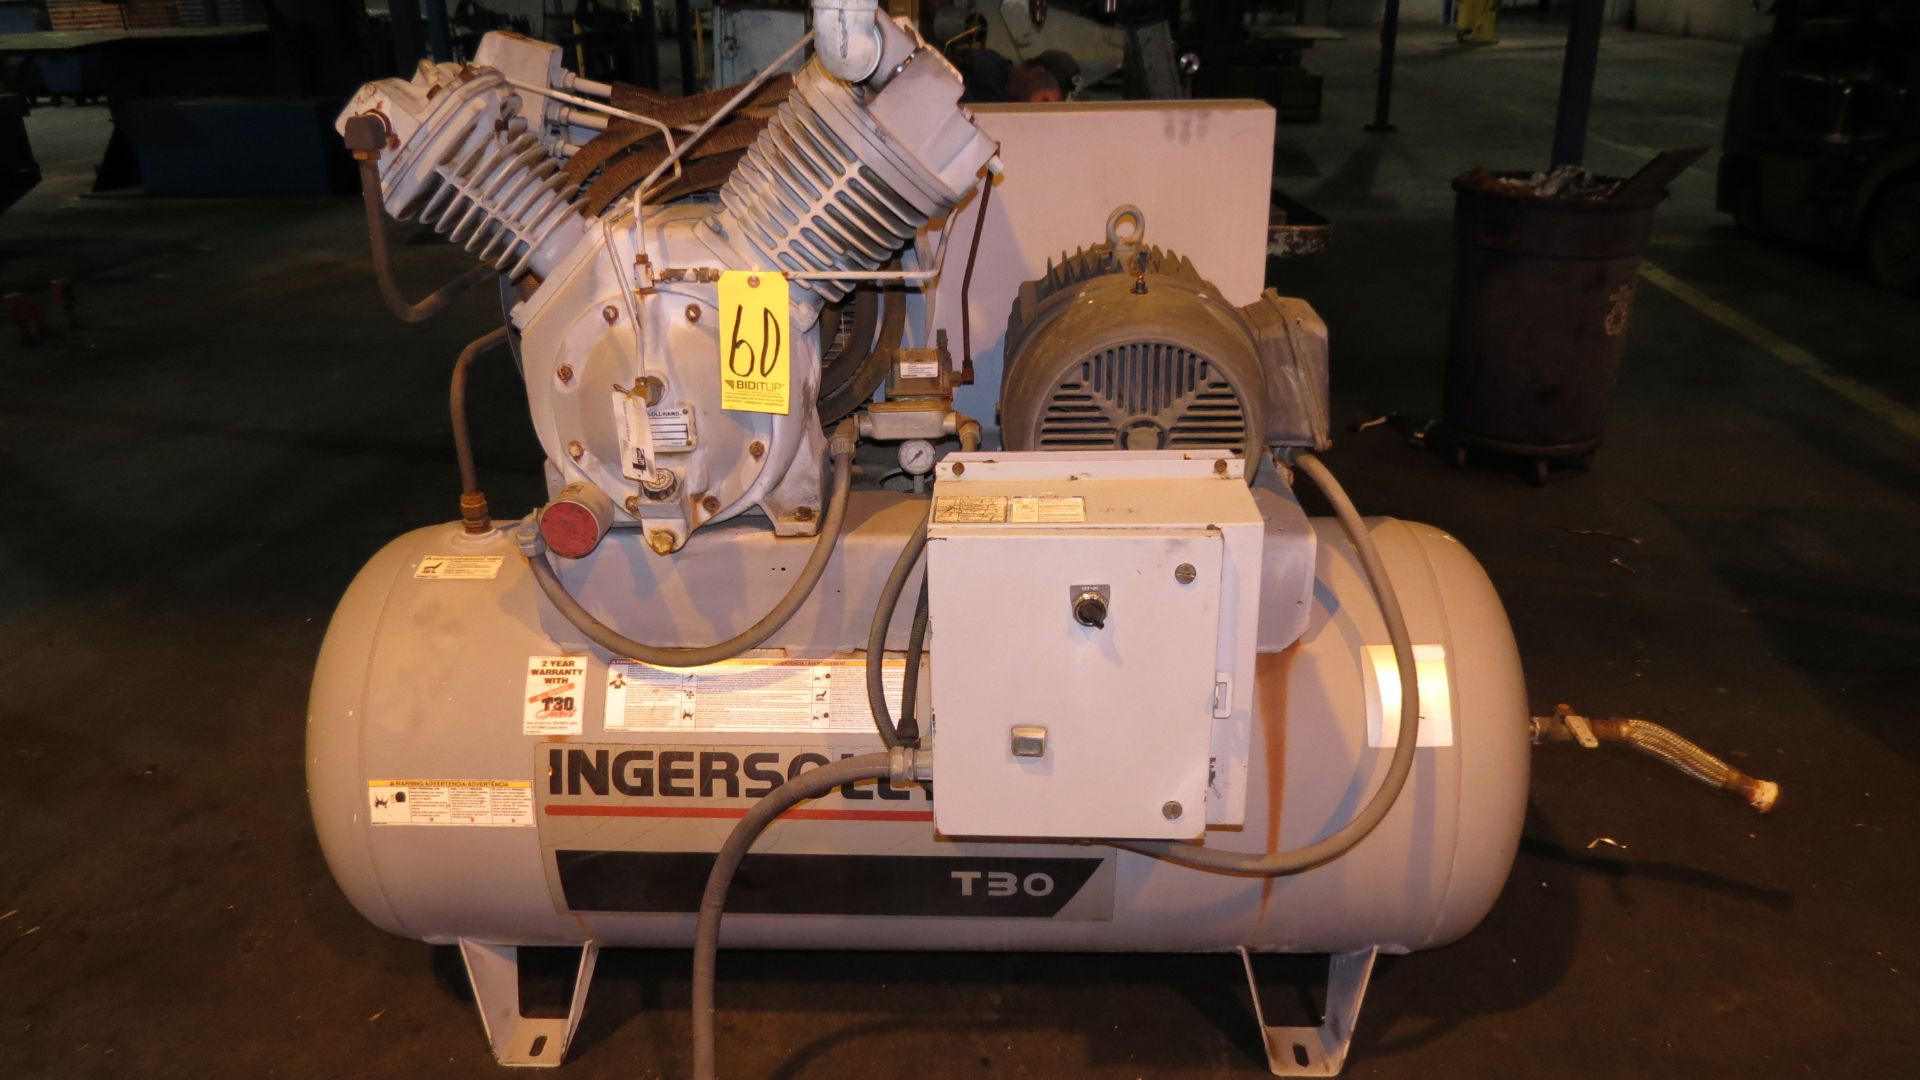 INGERSOLL RAND TANK MOUNTED AIR COMPRESSOR 15HP, 175 PSI, MODEL 7100 S#00003301